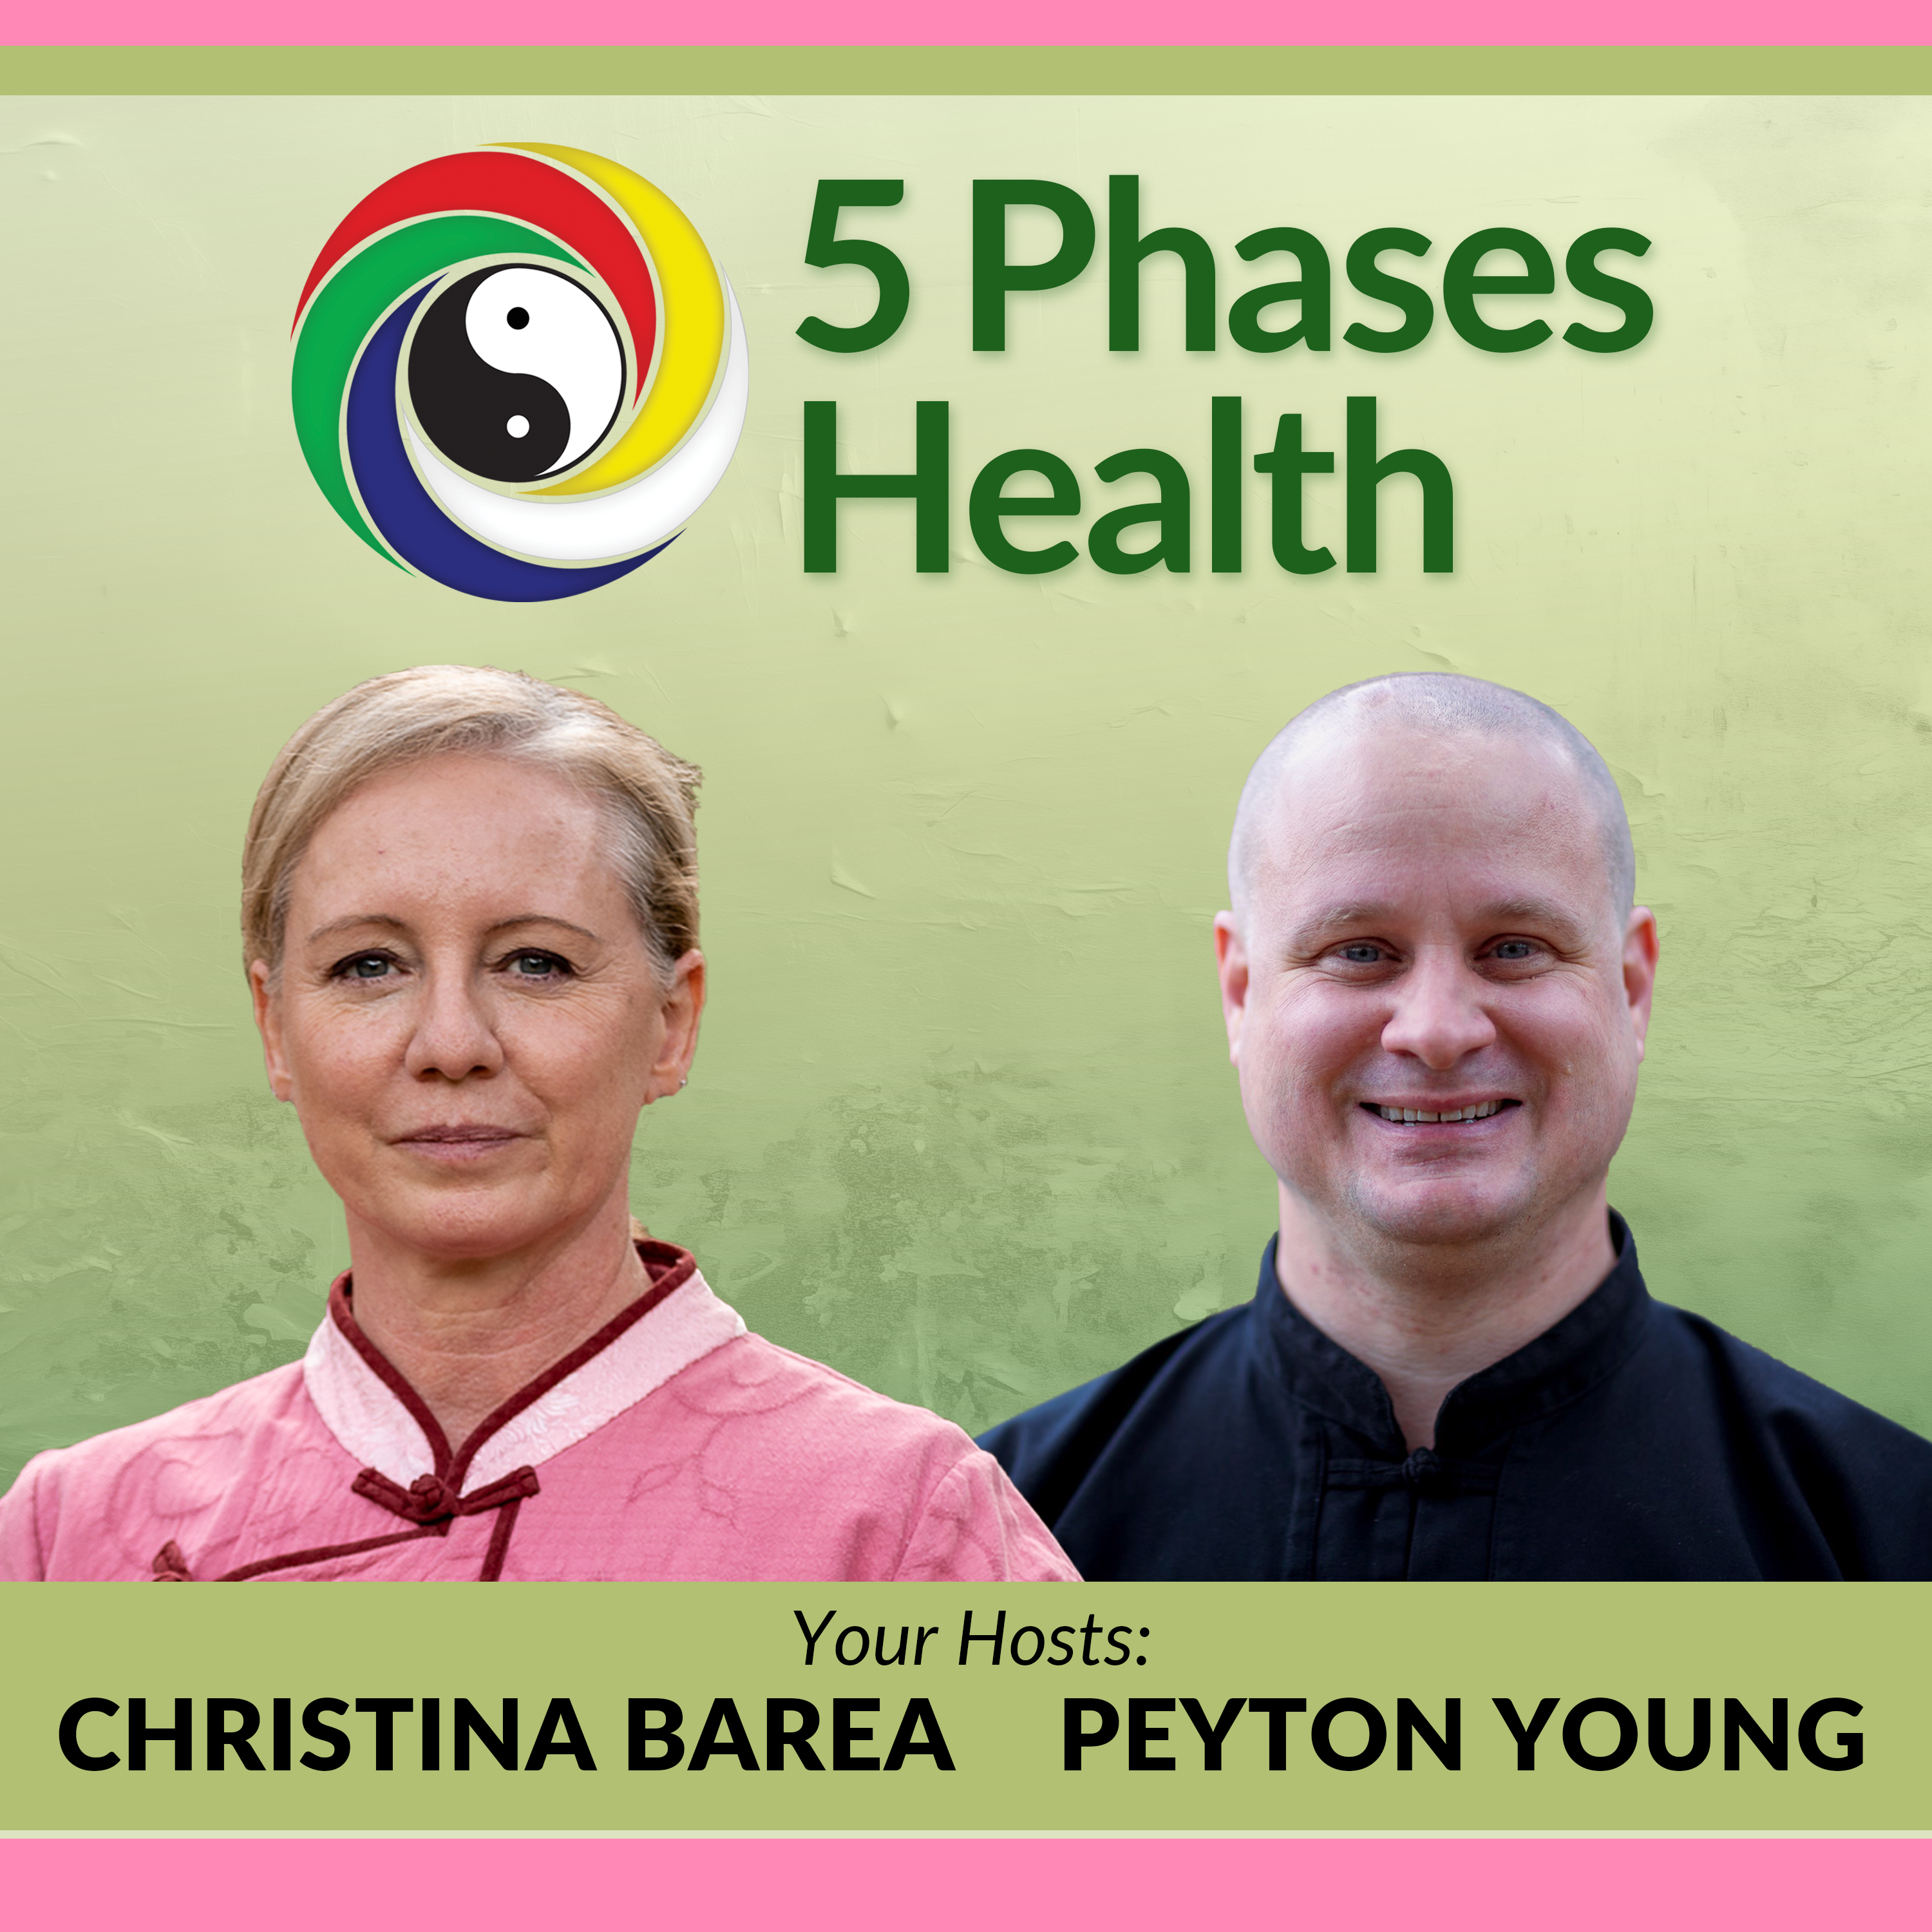 5 Phases Health